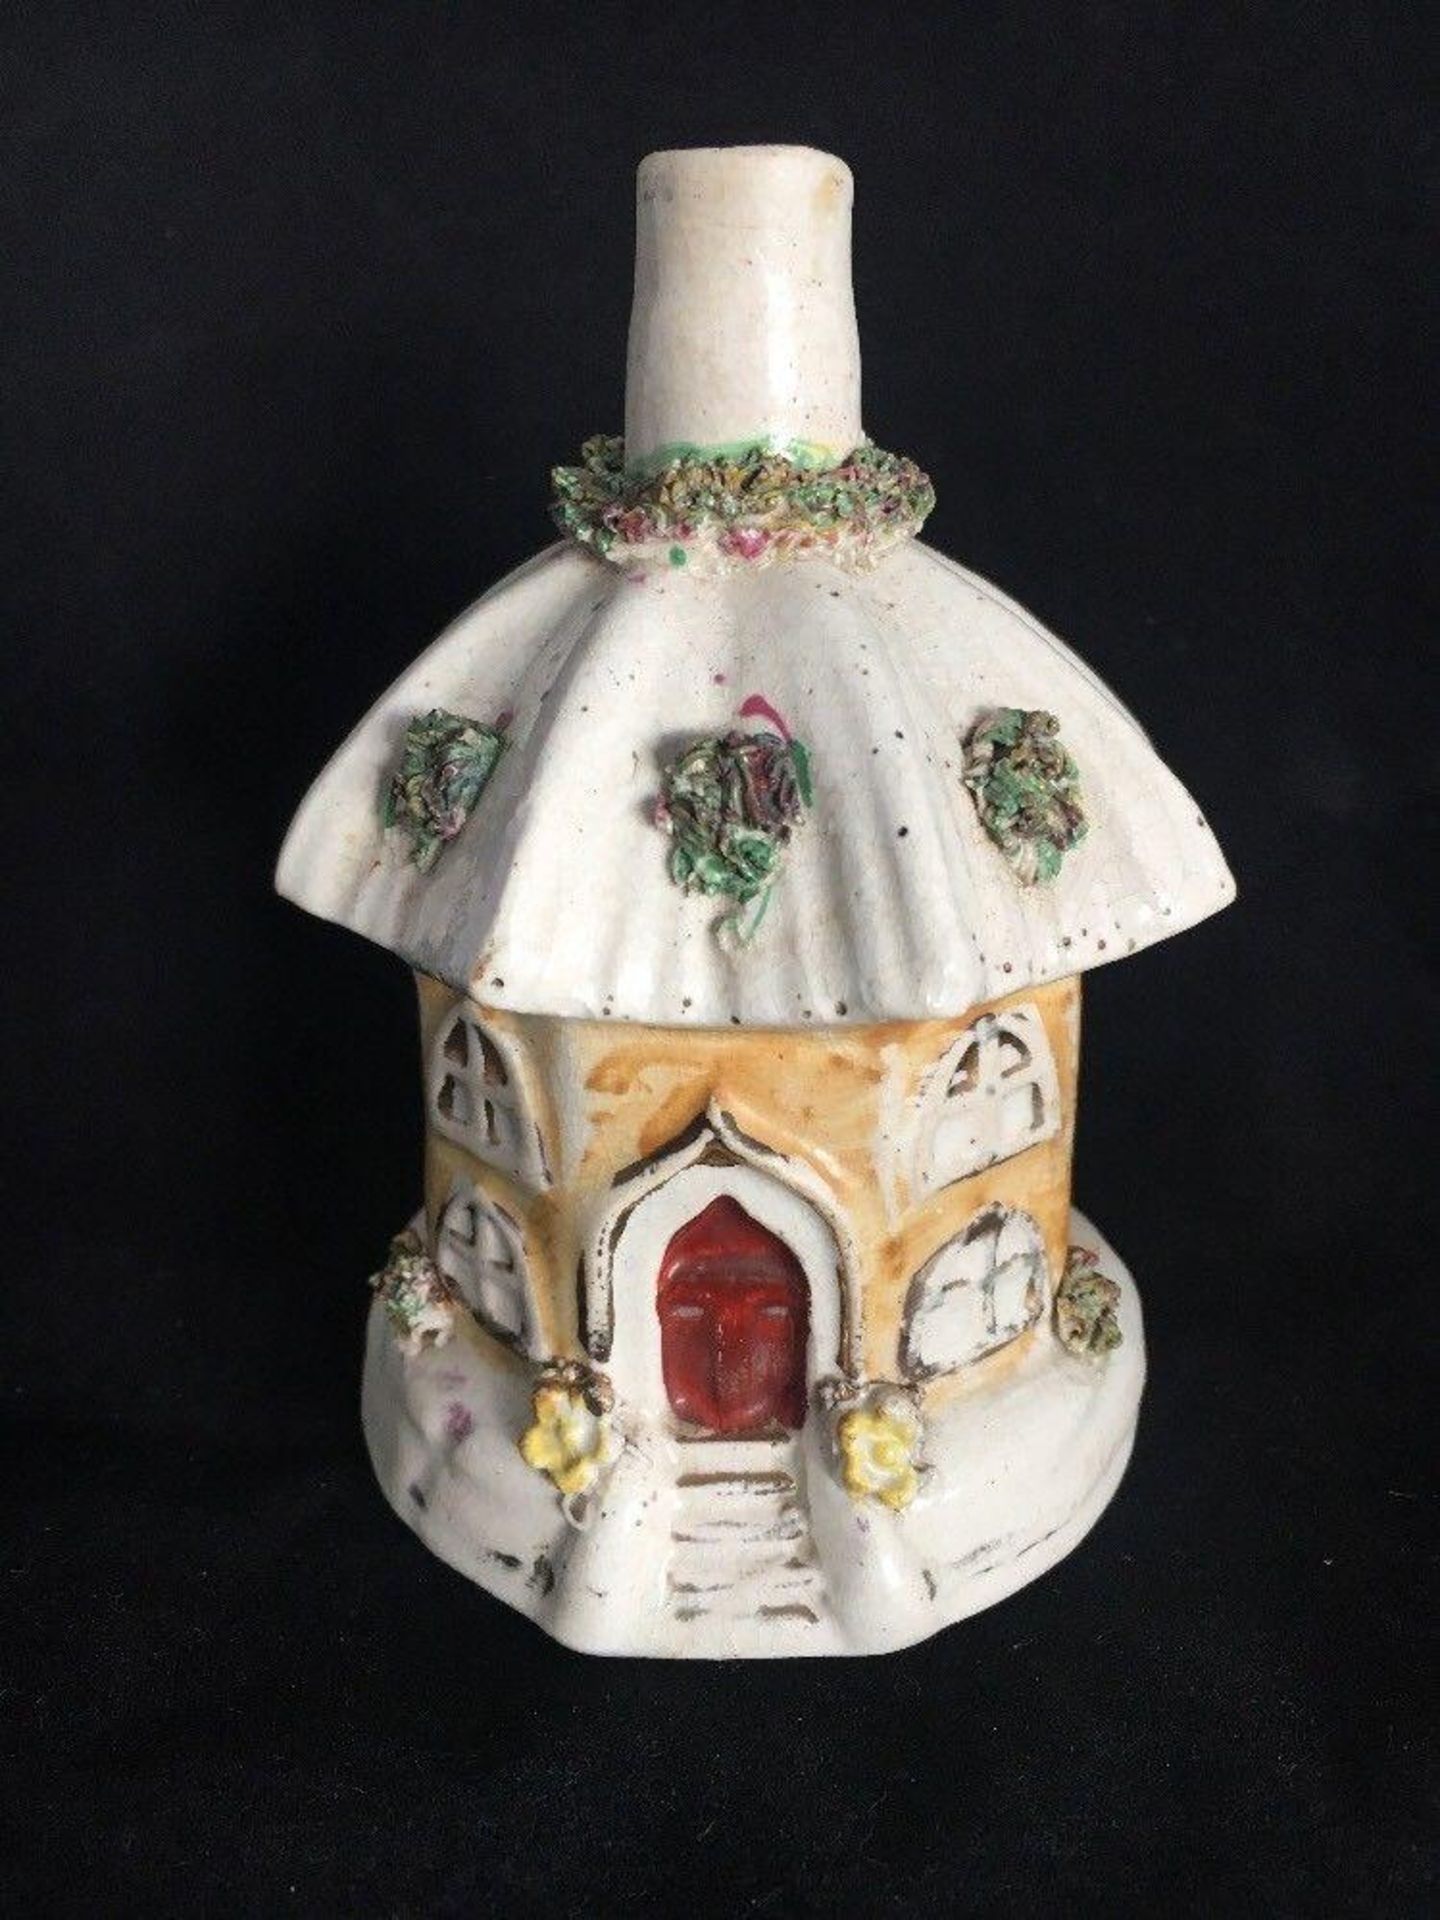 Staffordshire Pottery Octagonal House Pastille Burner Night Light in the form of a Thatched Cottage